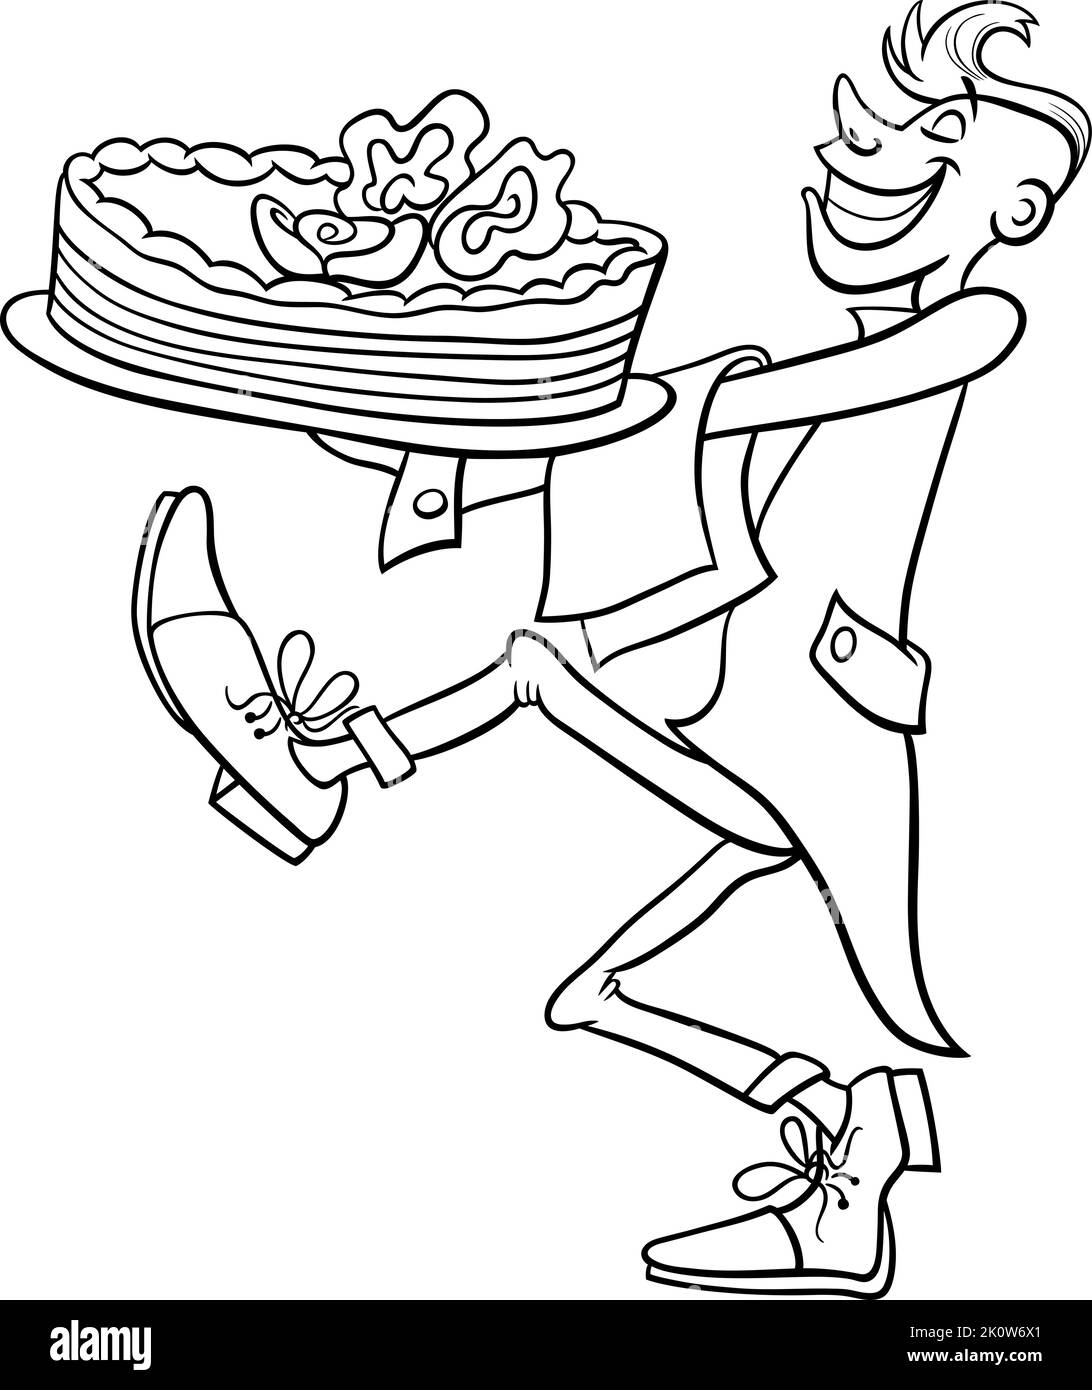 Black and white cartoon illustration of waiter serving a big cake coloring page Stock Vector